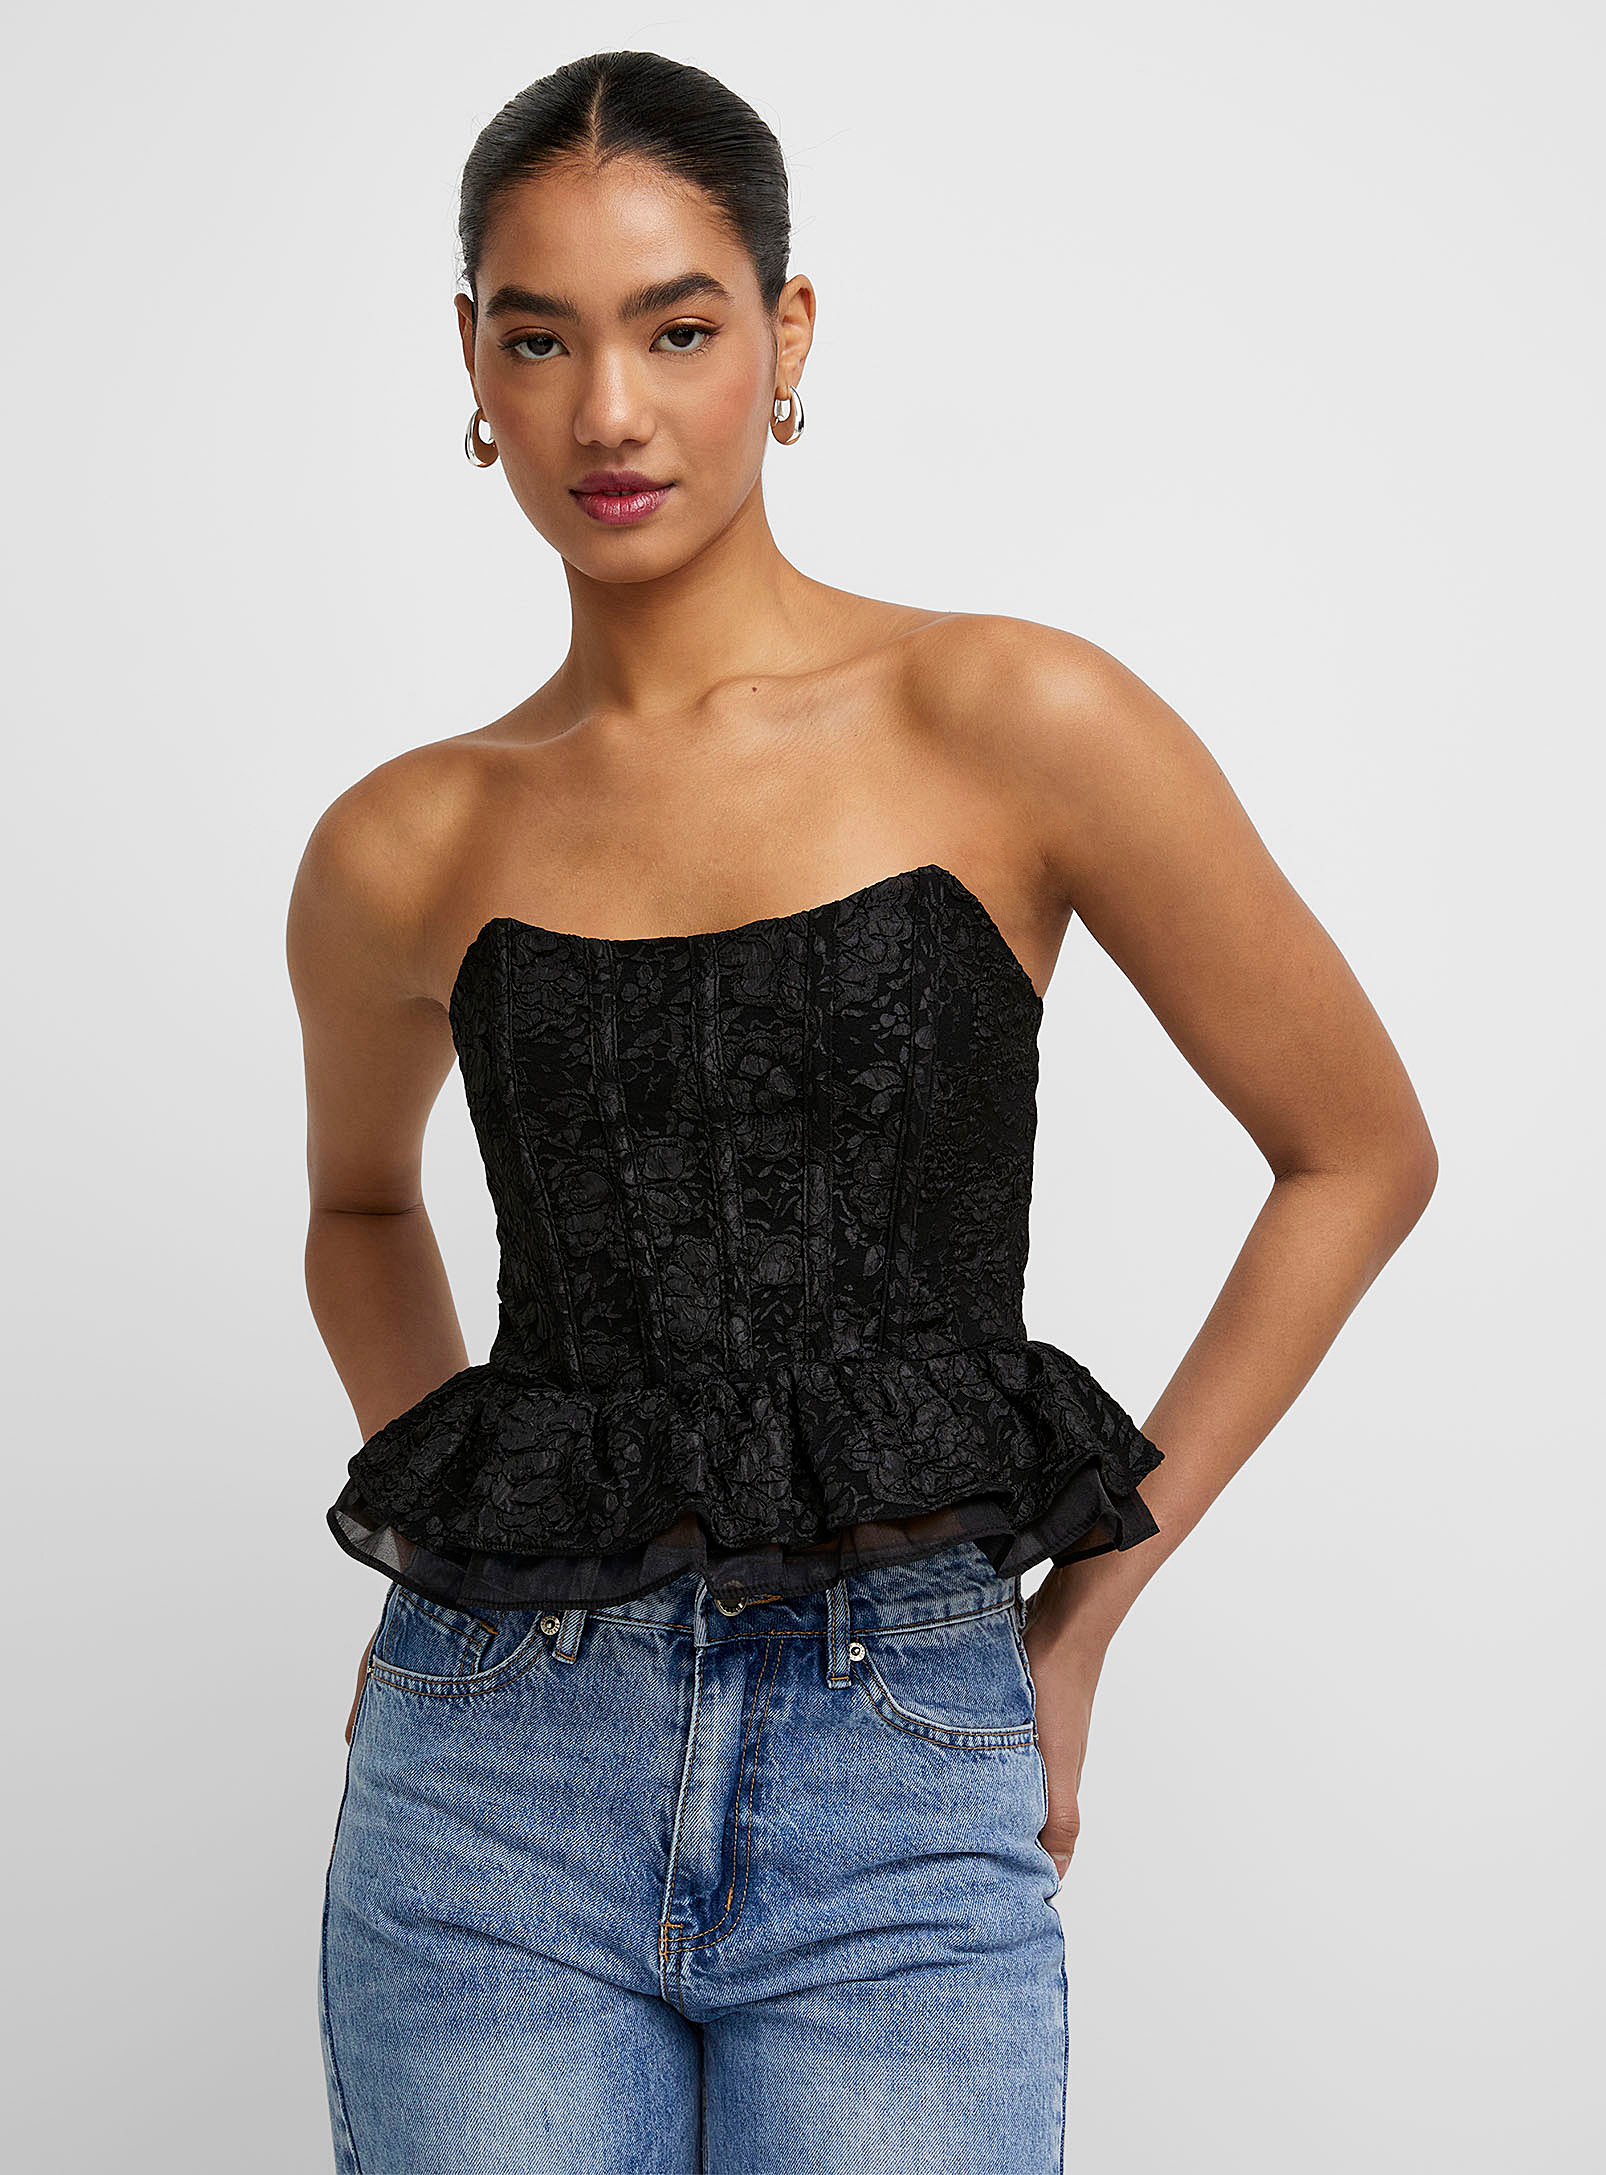 Icone Textured Jacquard Ruffle Bustier In Black